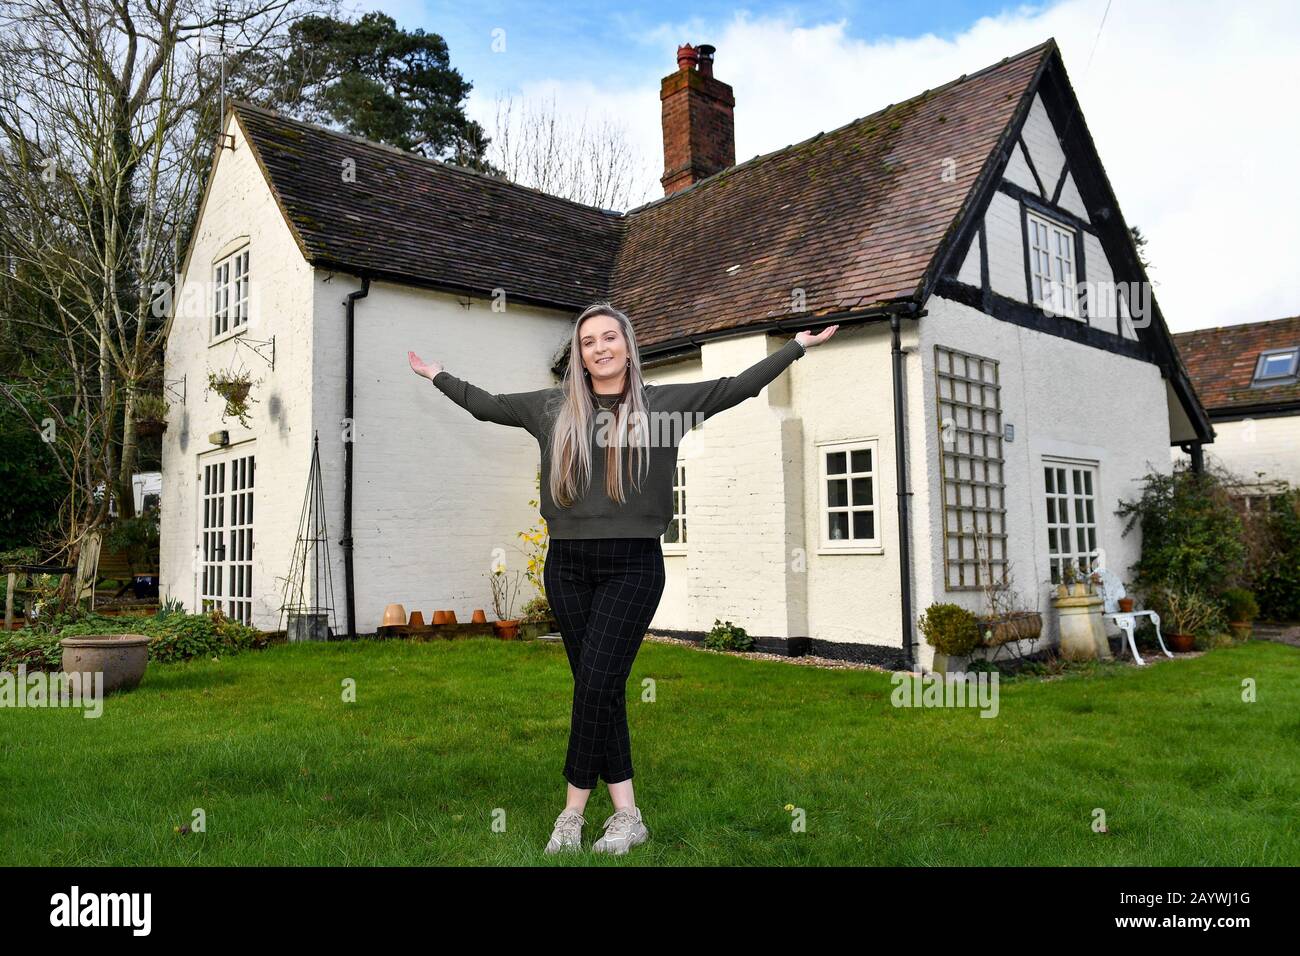 Jemma Nicklin, 23, celebrates during her first visit to Shrubbery Farm in Longnor near Shrewsbury, a 300-year-old four bedroom farmhouse which she won after buying two £2 tickets in a raffle organised by owner Mike Chatha. Stock Photo